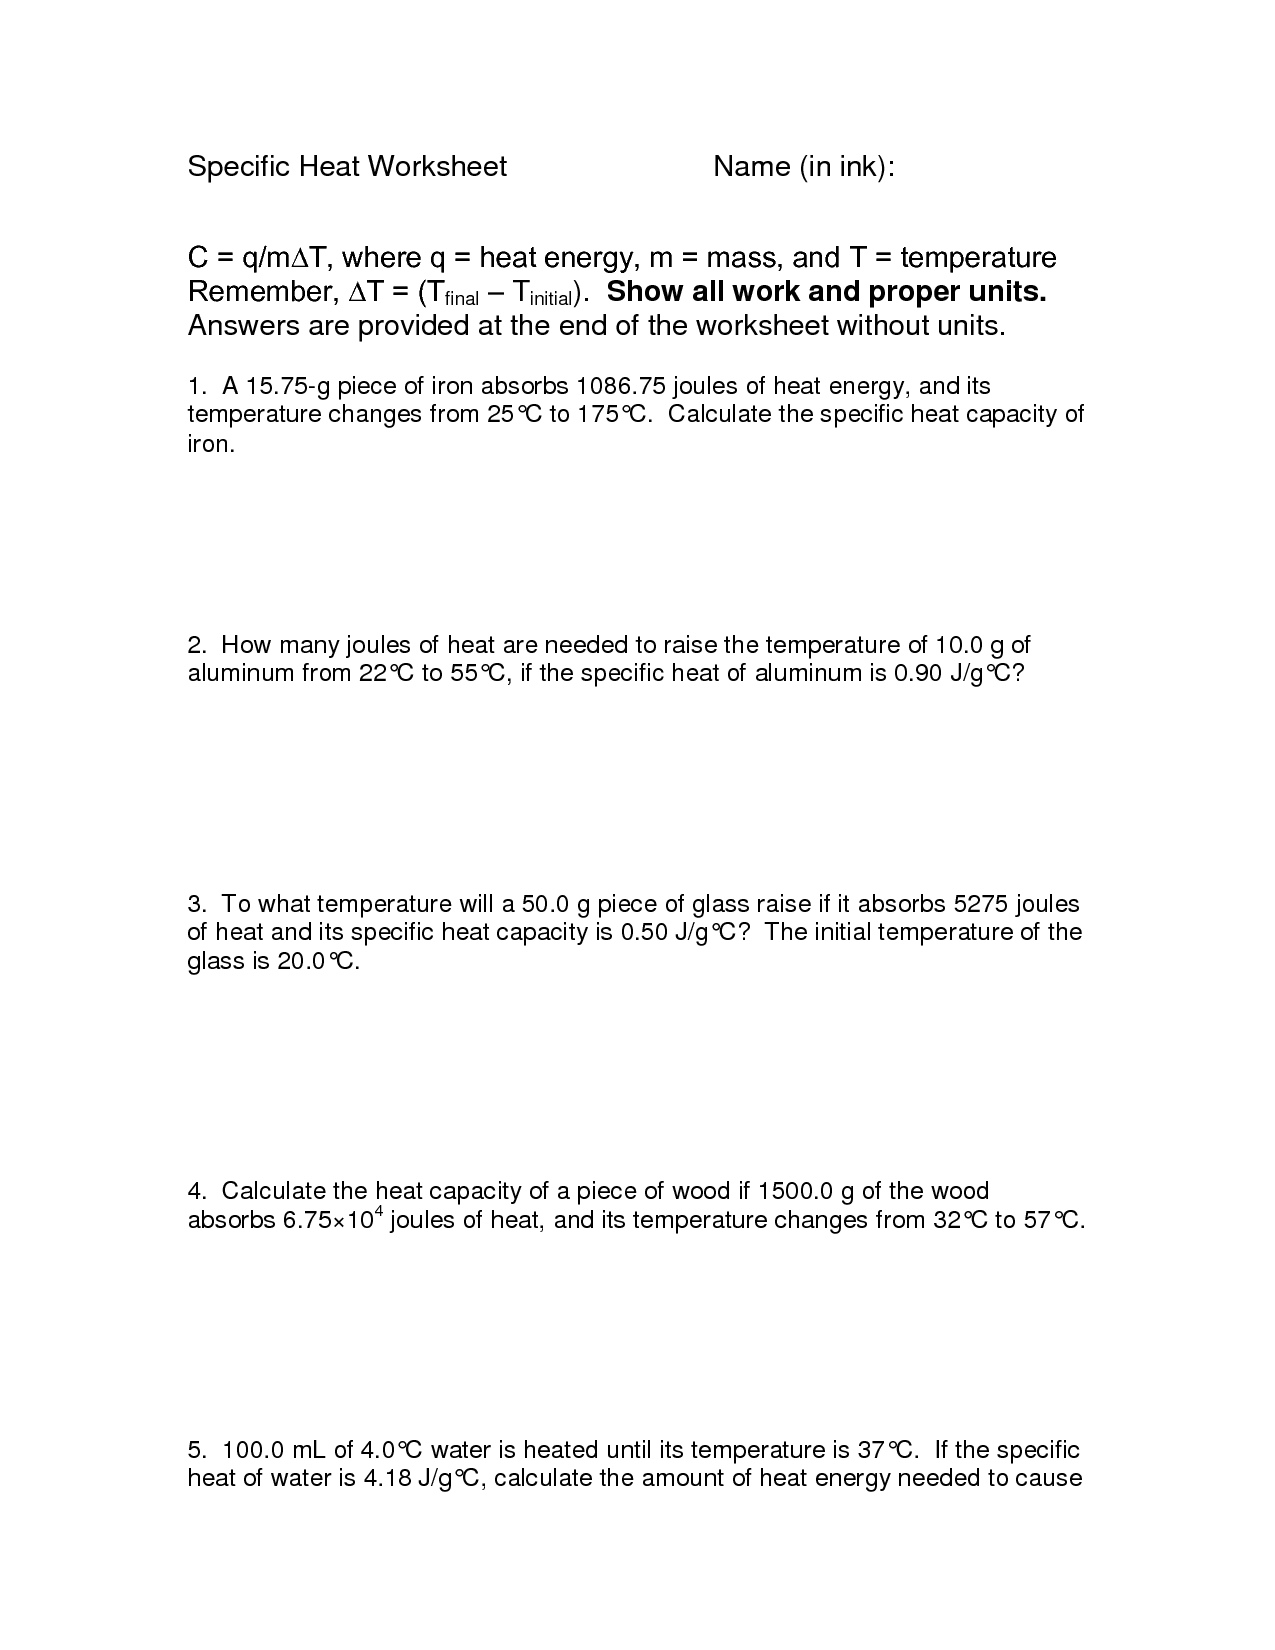 Specific Heat Calculations Worksheet Answers